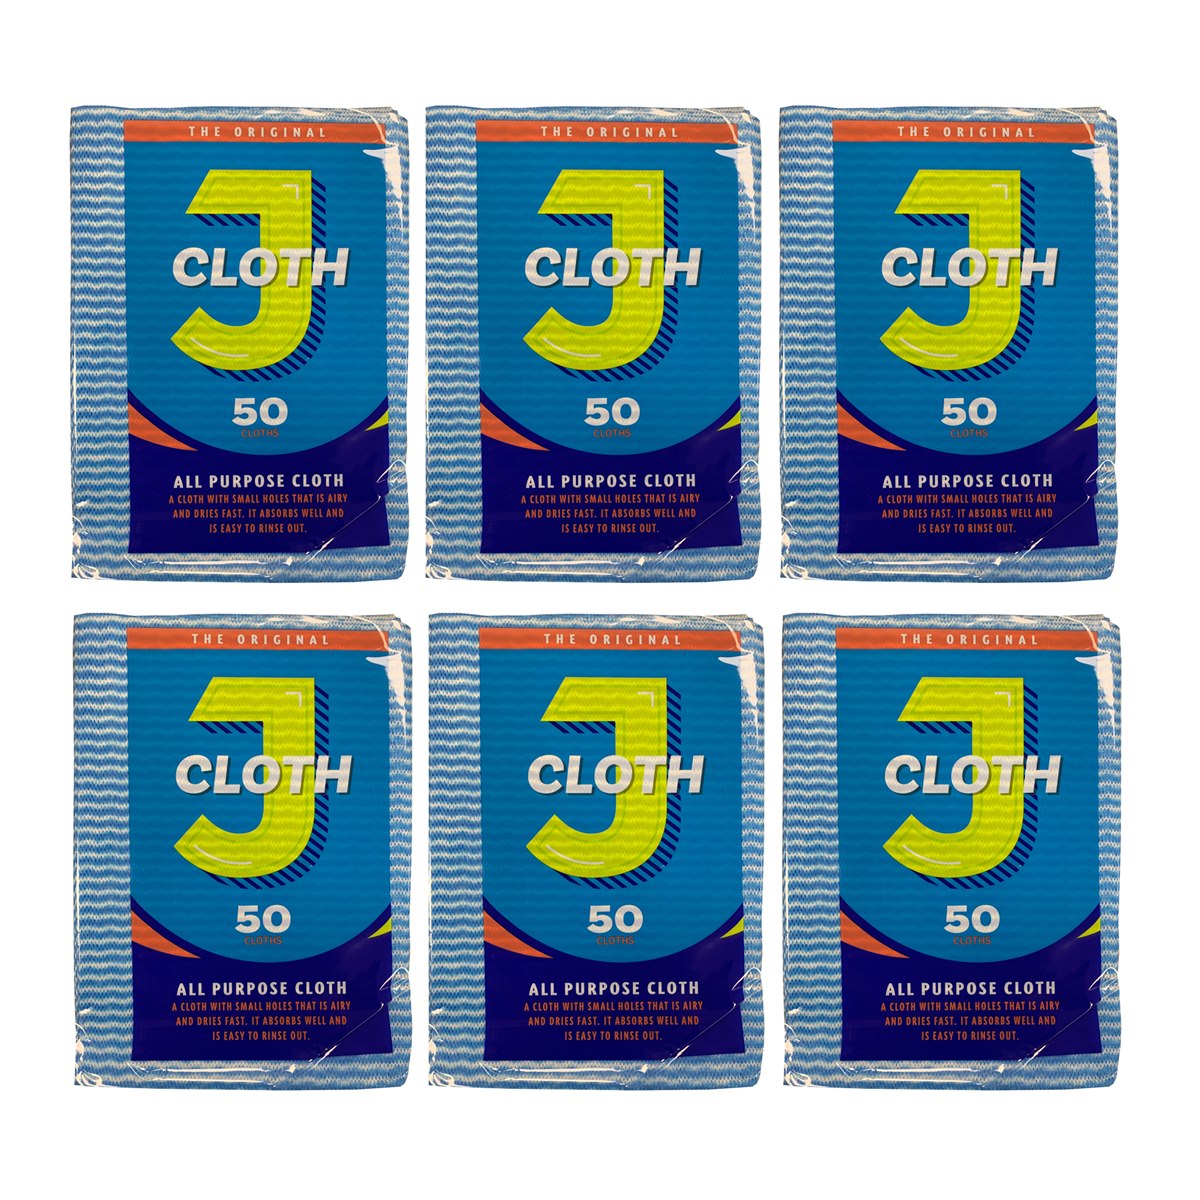 Case of 6 x J Cloth Pack of 50 (Total 300)